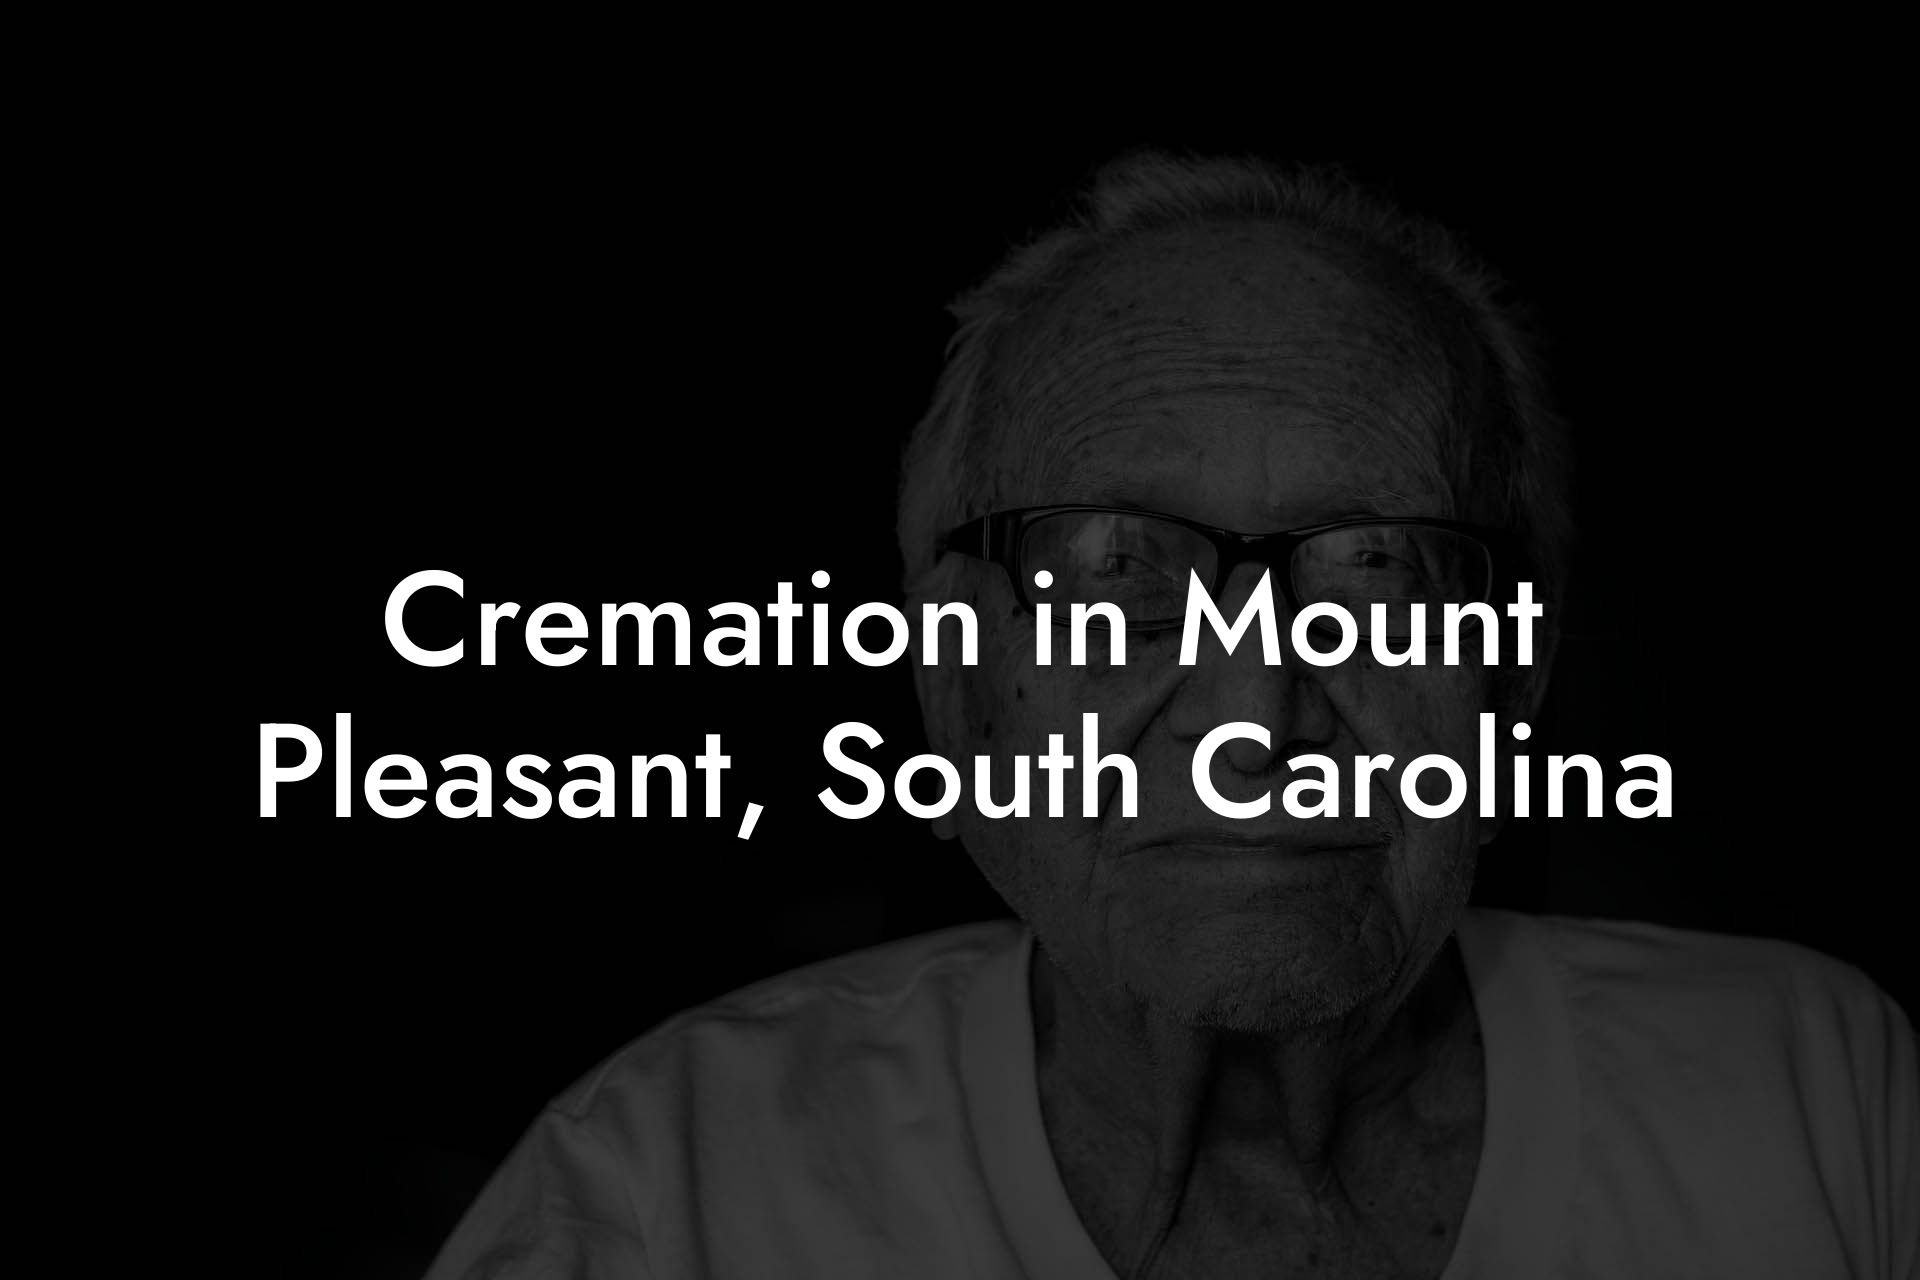 Cremation in Mount Pleasant, South Carolina